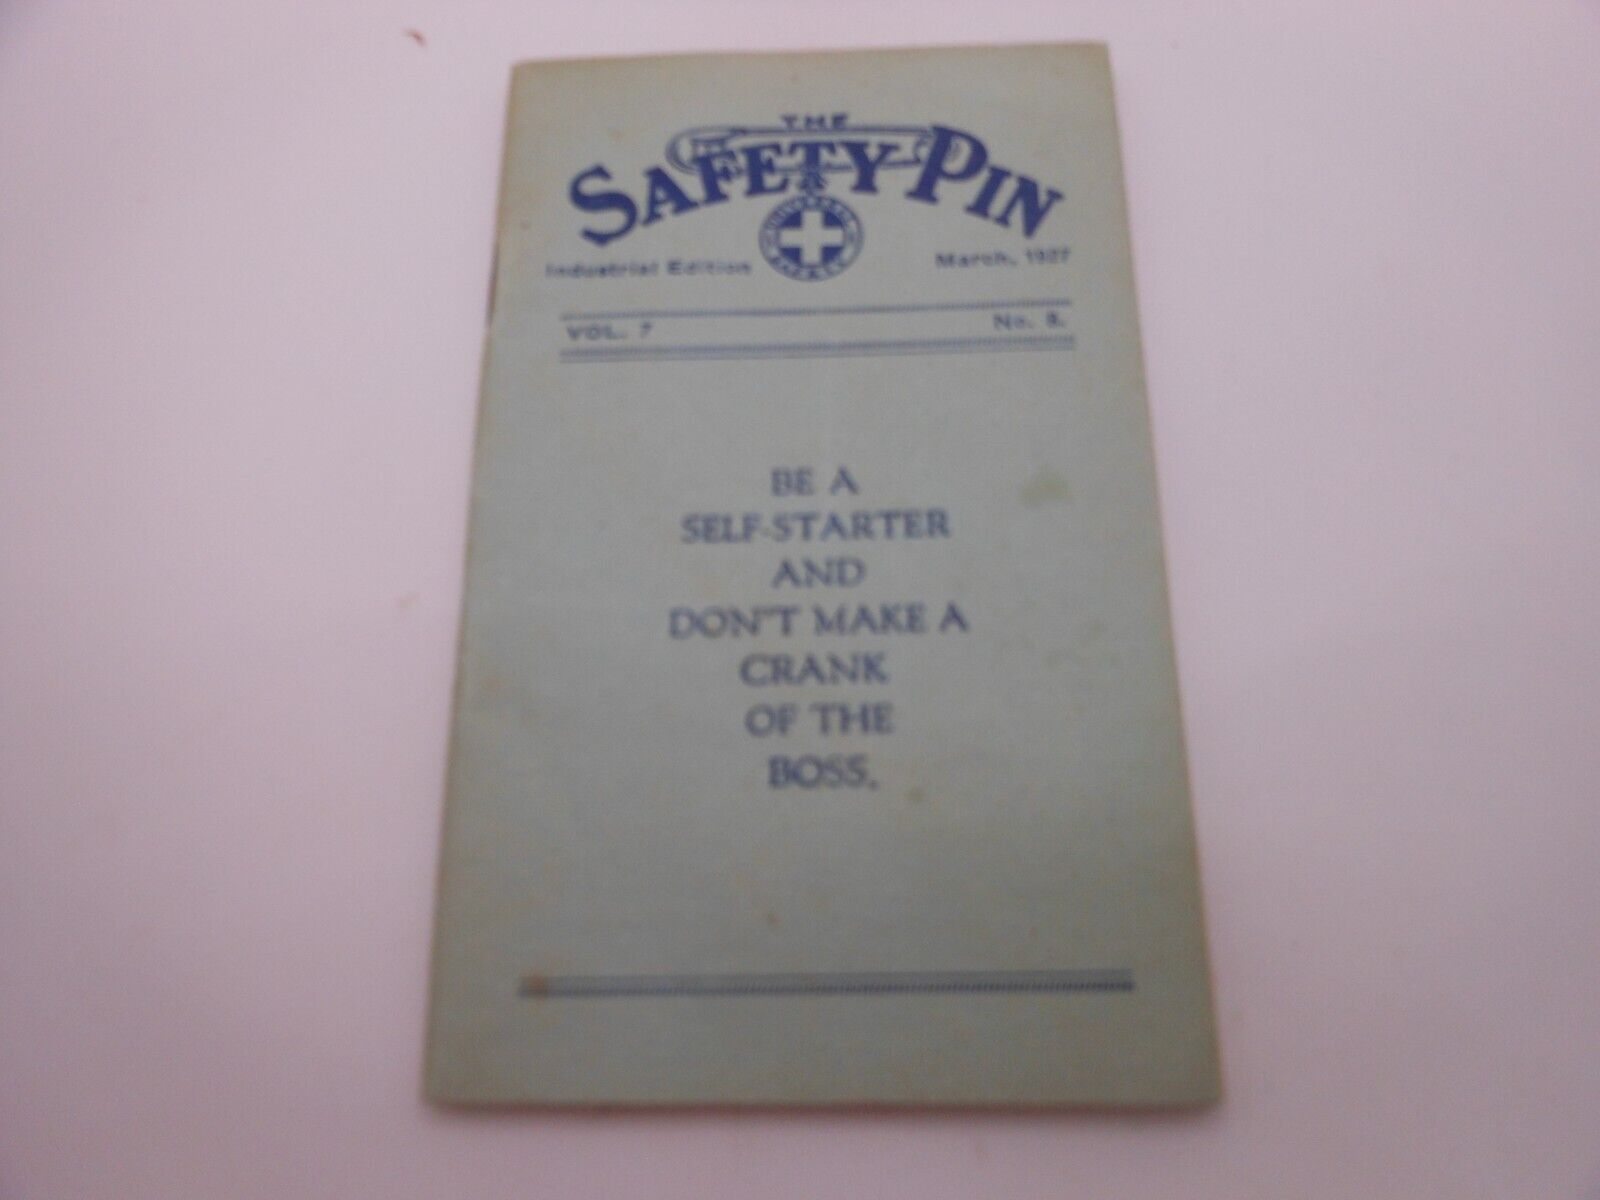 1927 The Safety Pin, Vol 7, No 8 Industrial Edition, Universal Safety Pocket Siz